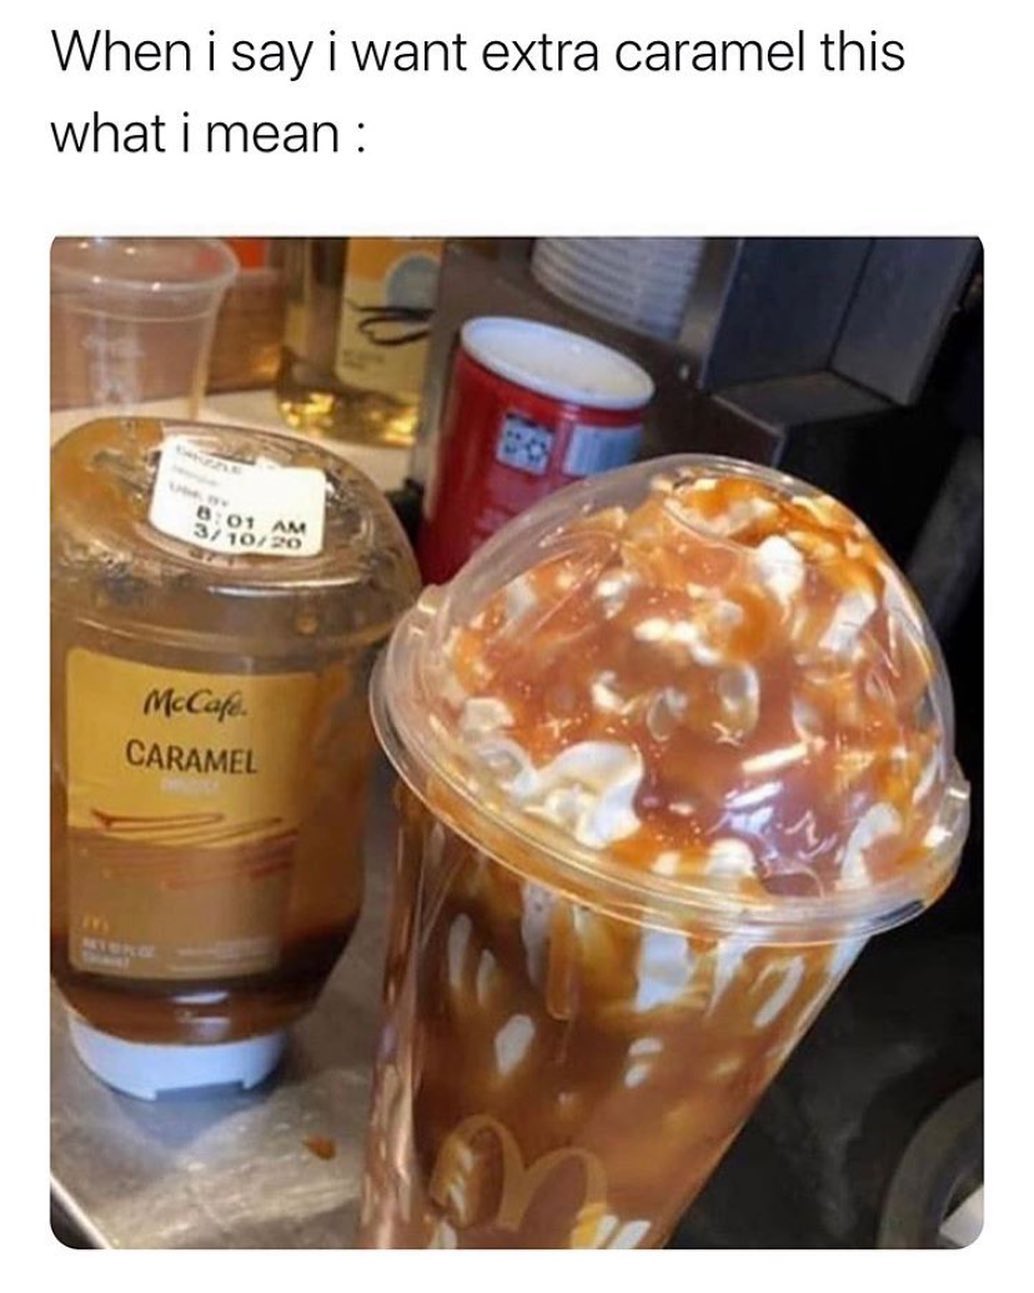 When I say I want extra caramel this what I mean: